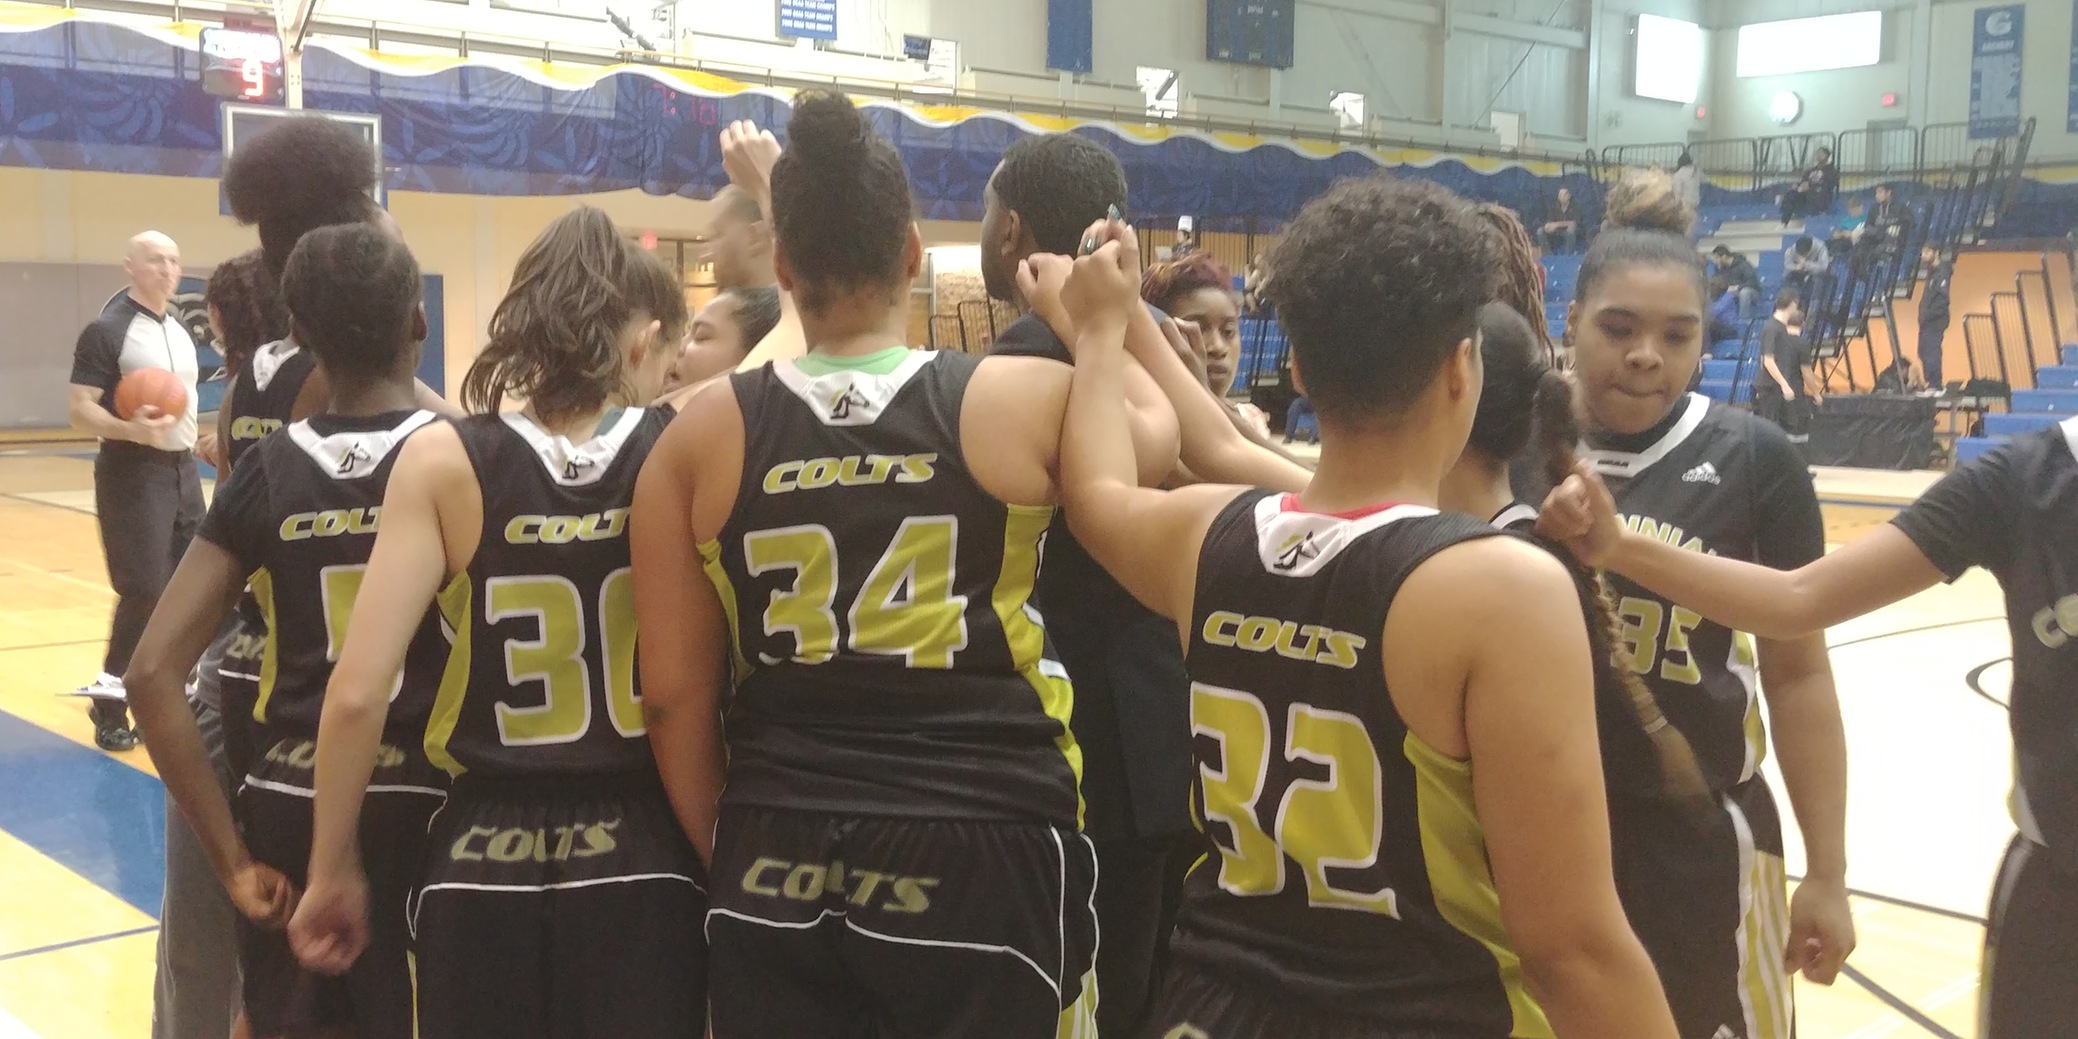 The Centennial Colts bounced back with a 65-32 blowout win on the road over the Georgian Grizzlies and snapped a two game losing streak. Yasmeen Smith led all scorers with 20 points and 14 rebounds.